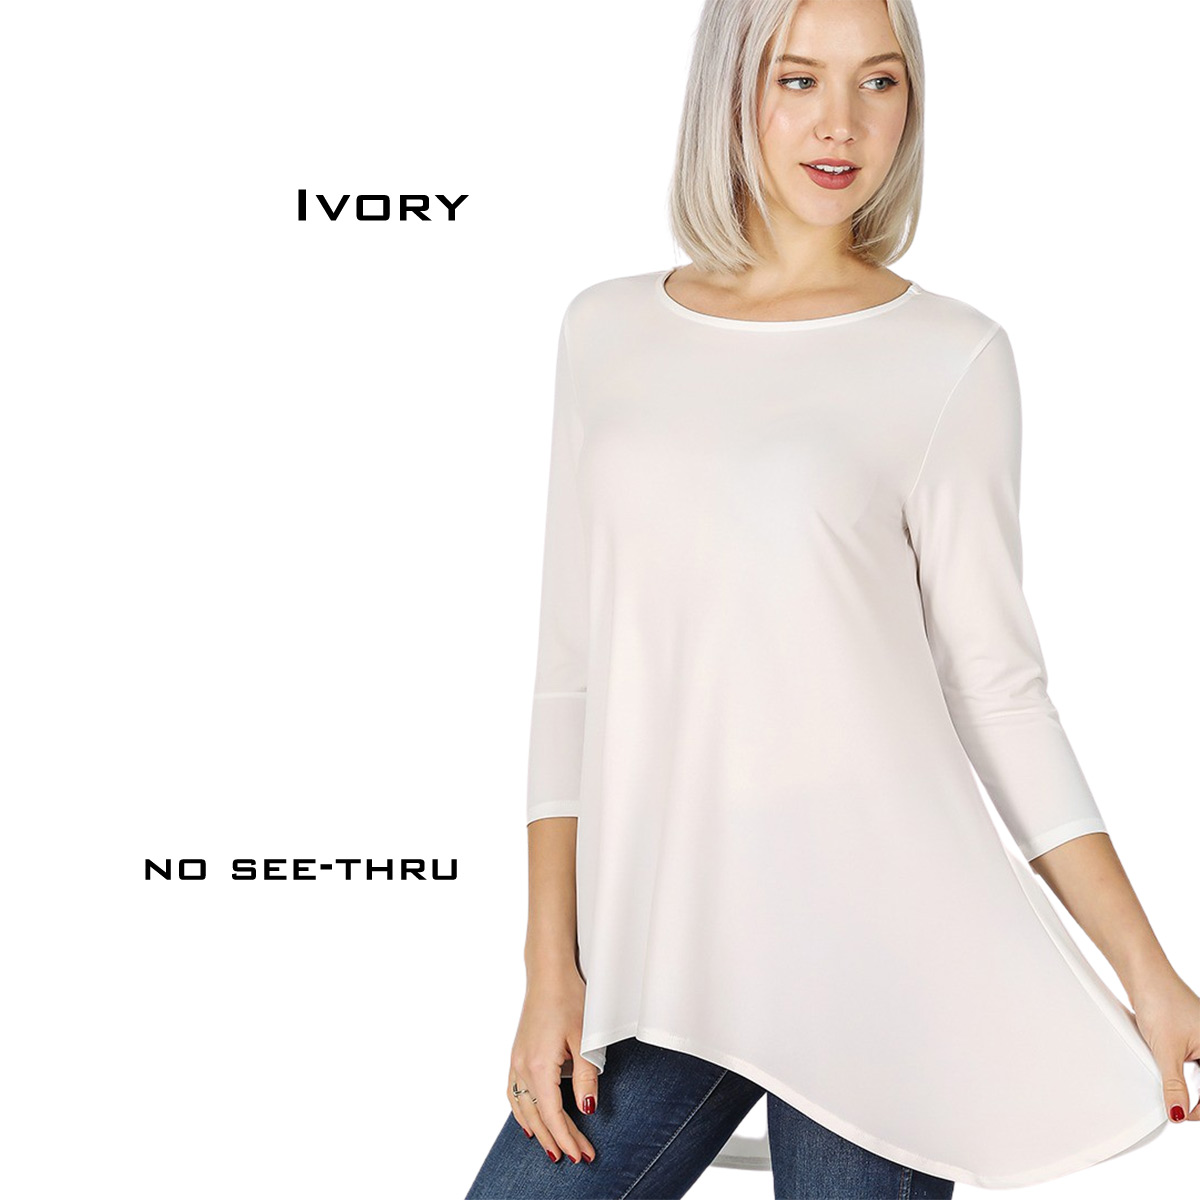 IVORY High-Low 3/4 Sleeve Top 2367